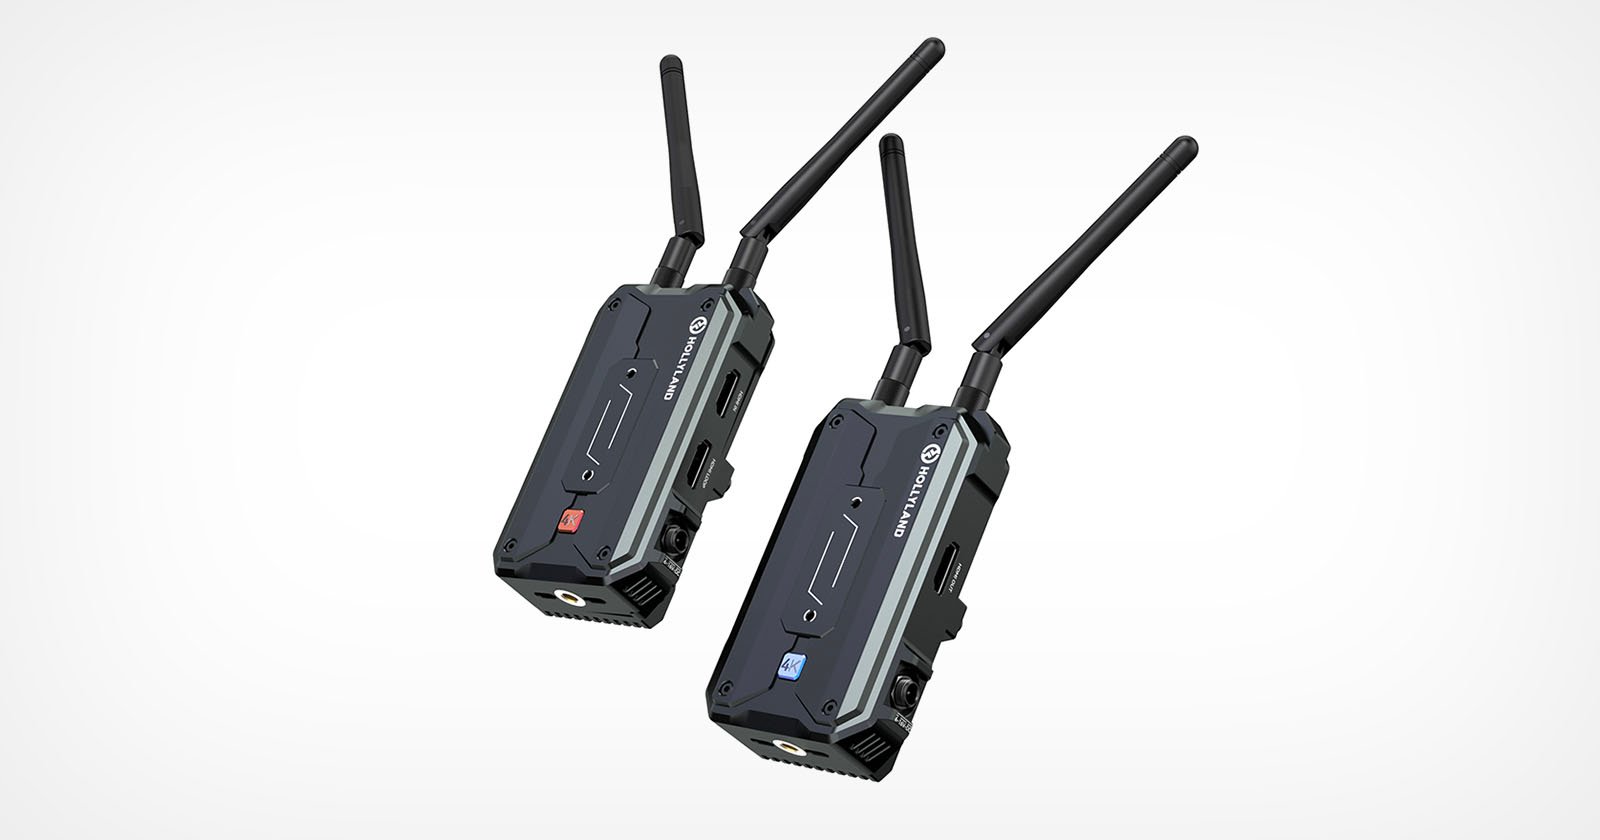 Hollylands New Pyro Series Wirelessly Transmits Video Up to 1,300 Feet